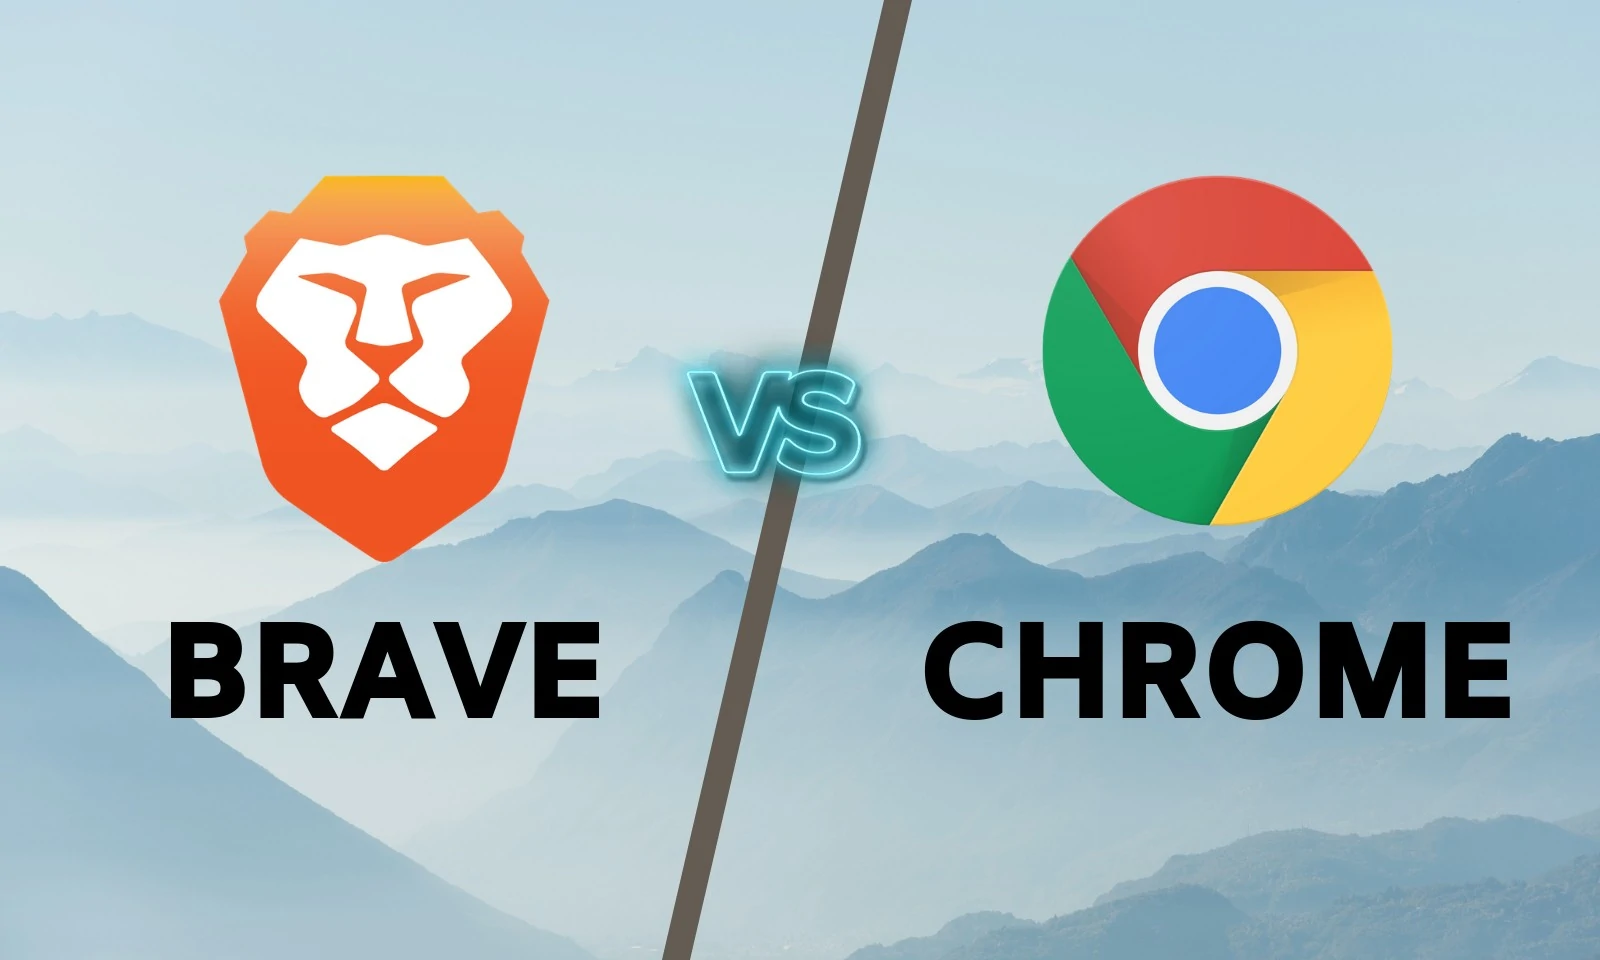 brave browser for pc